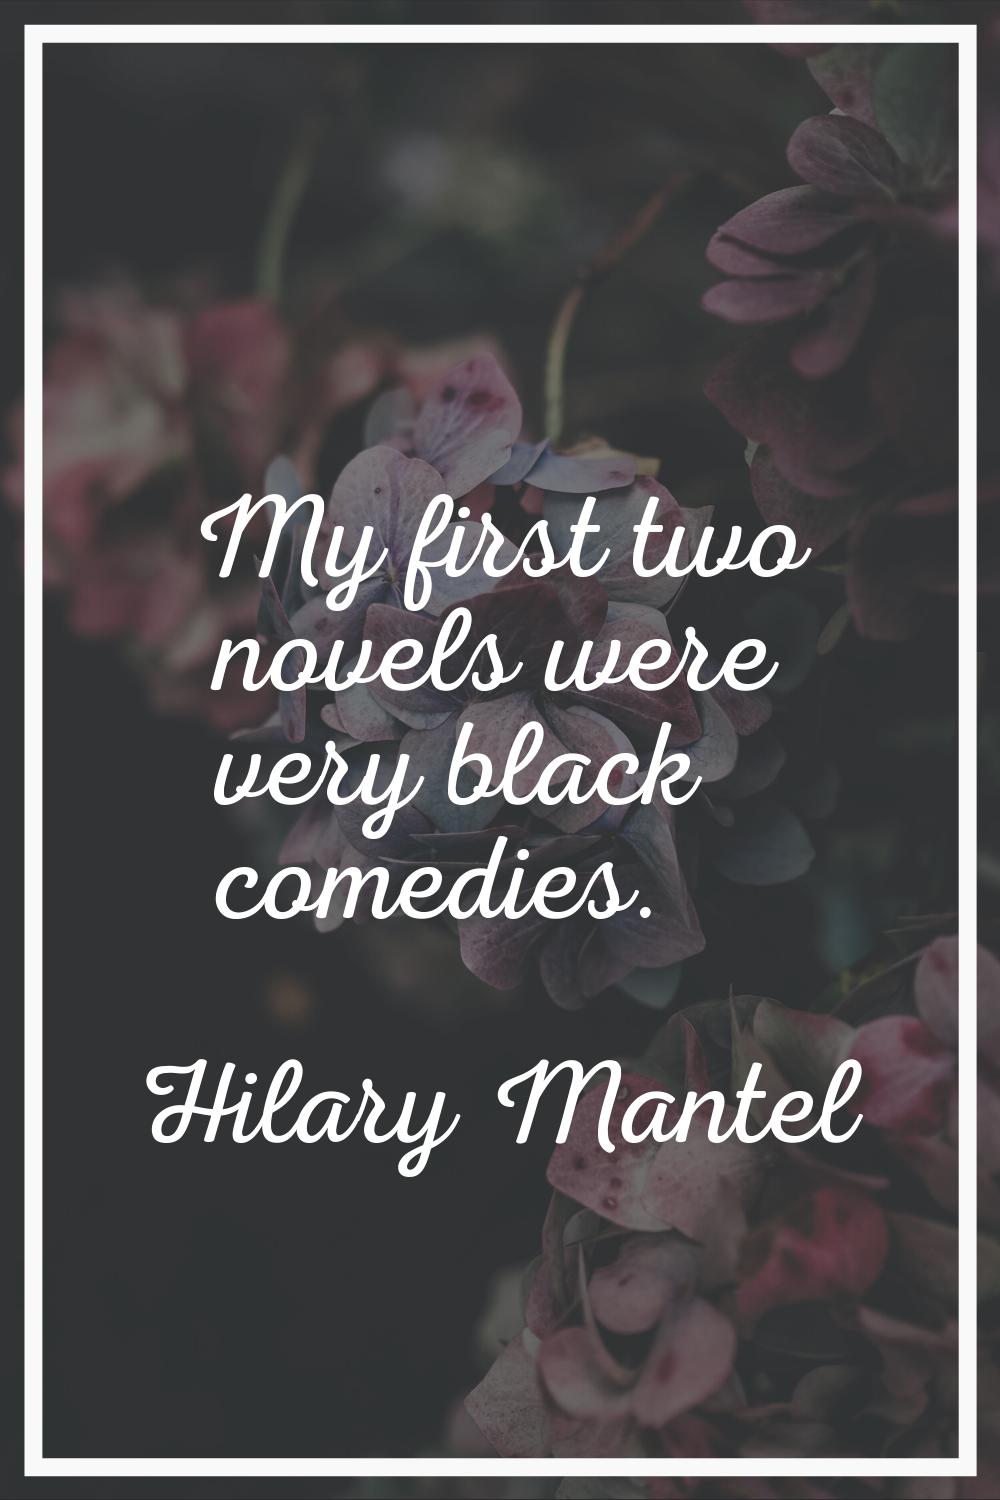 My first two novels were very black comedies.